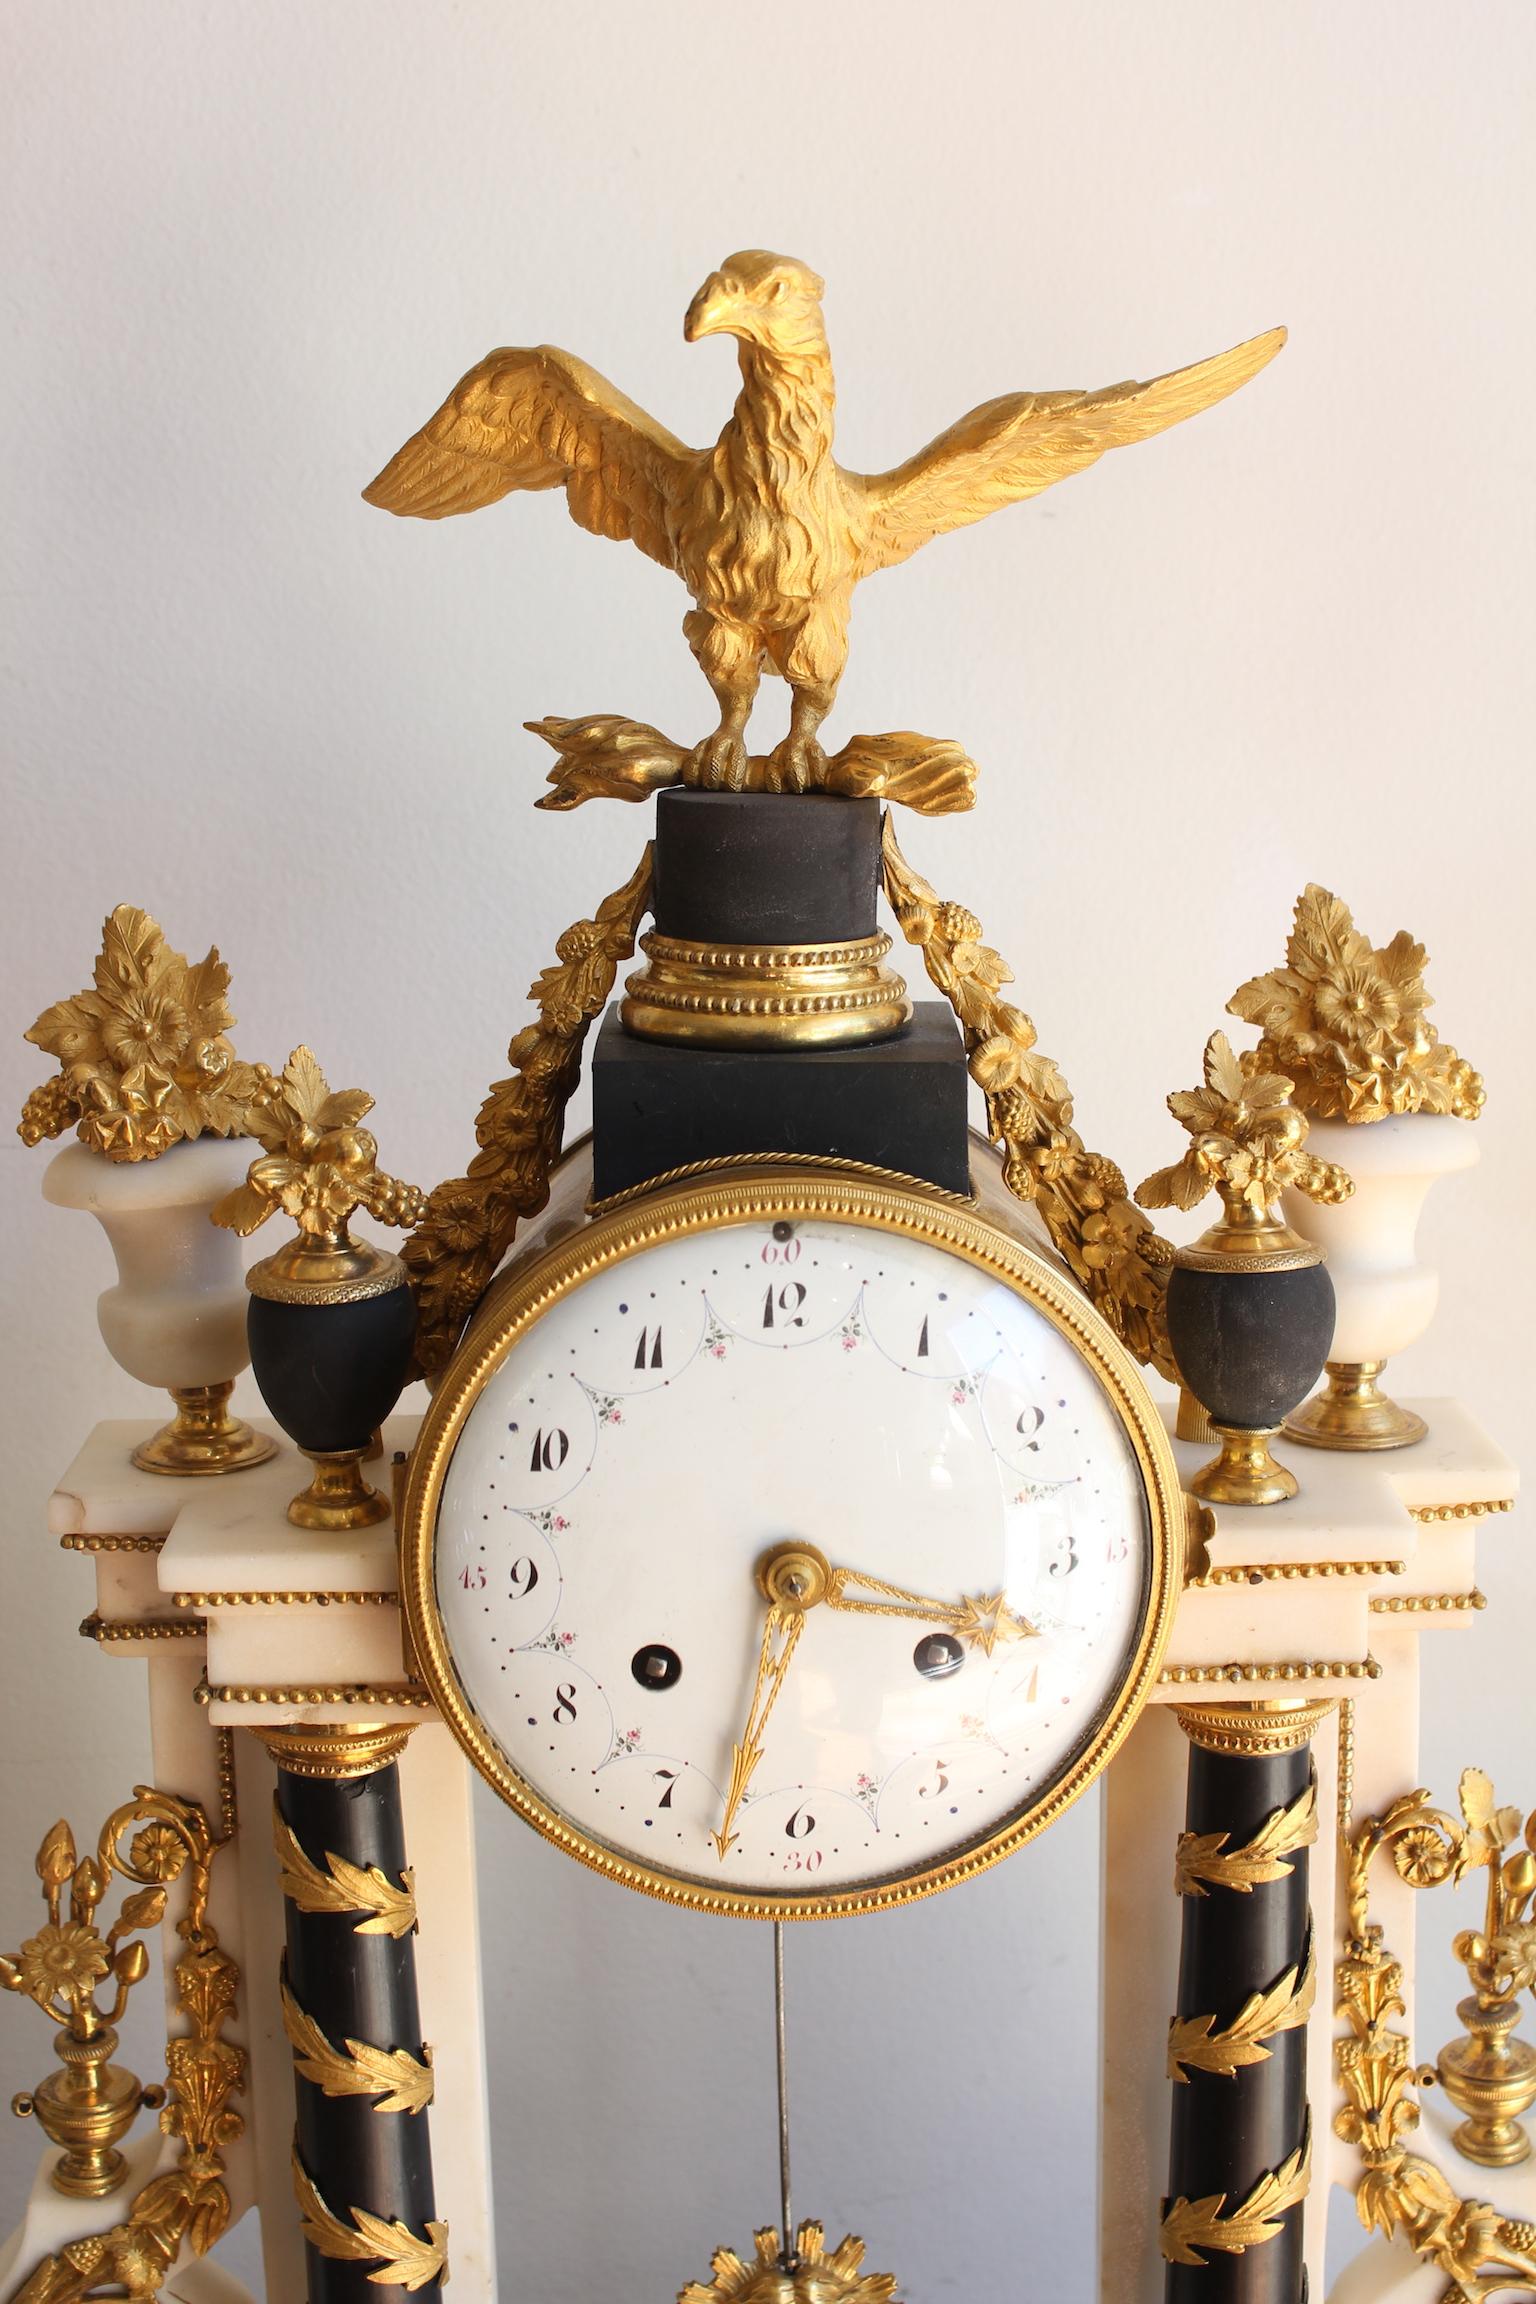 A Louis XVI Mantel set comprising a white and black marble clock with gilded bronze decorations and a gilded bronze eagle on top, and two Putti candelabras.
Very good condition. The mechanism of the clock has been revised by a